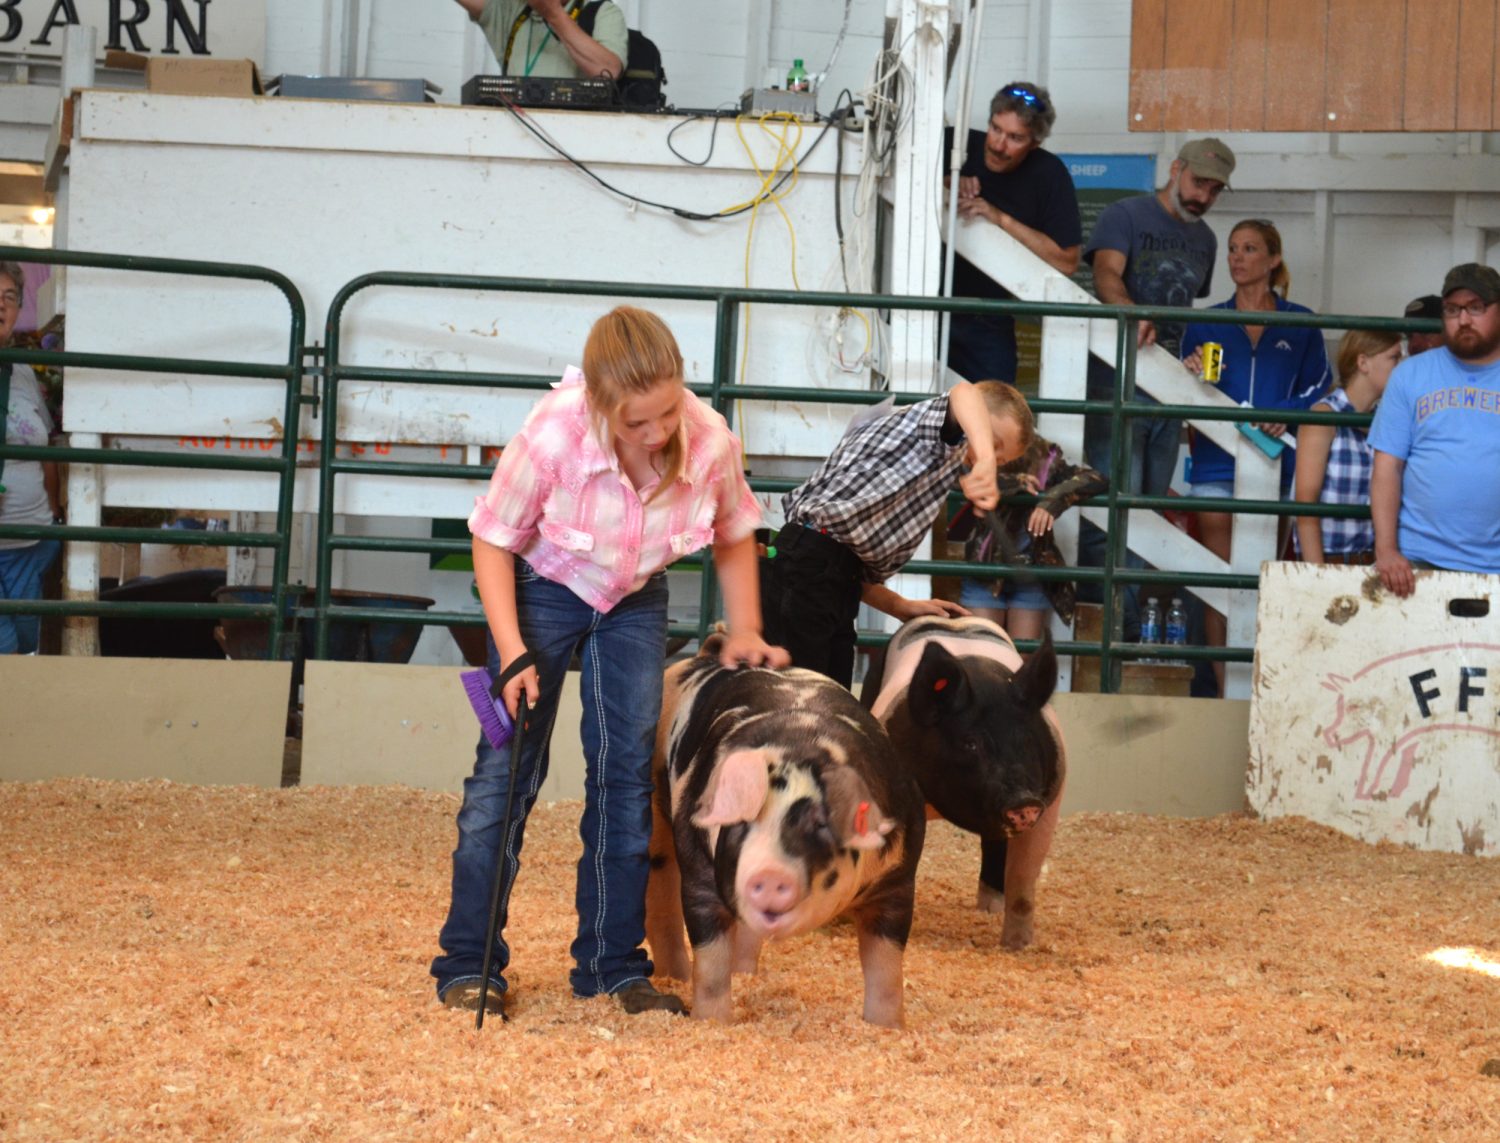 Lincoln County 4-H Fair shrugs off storm